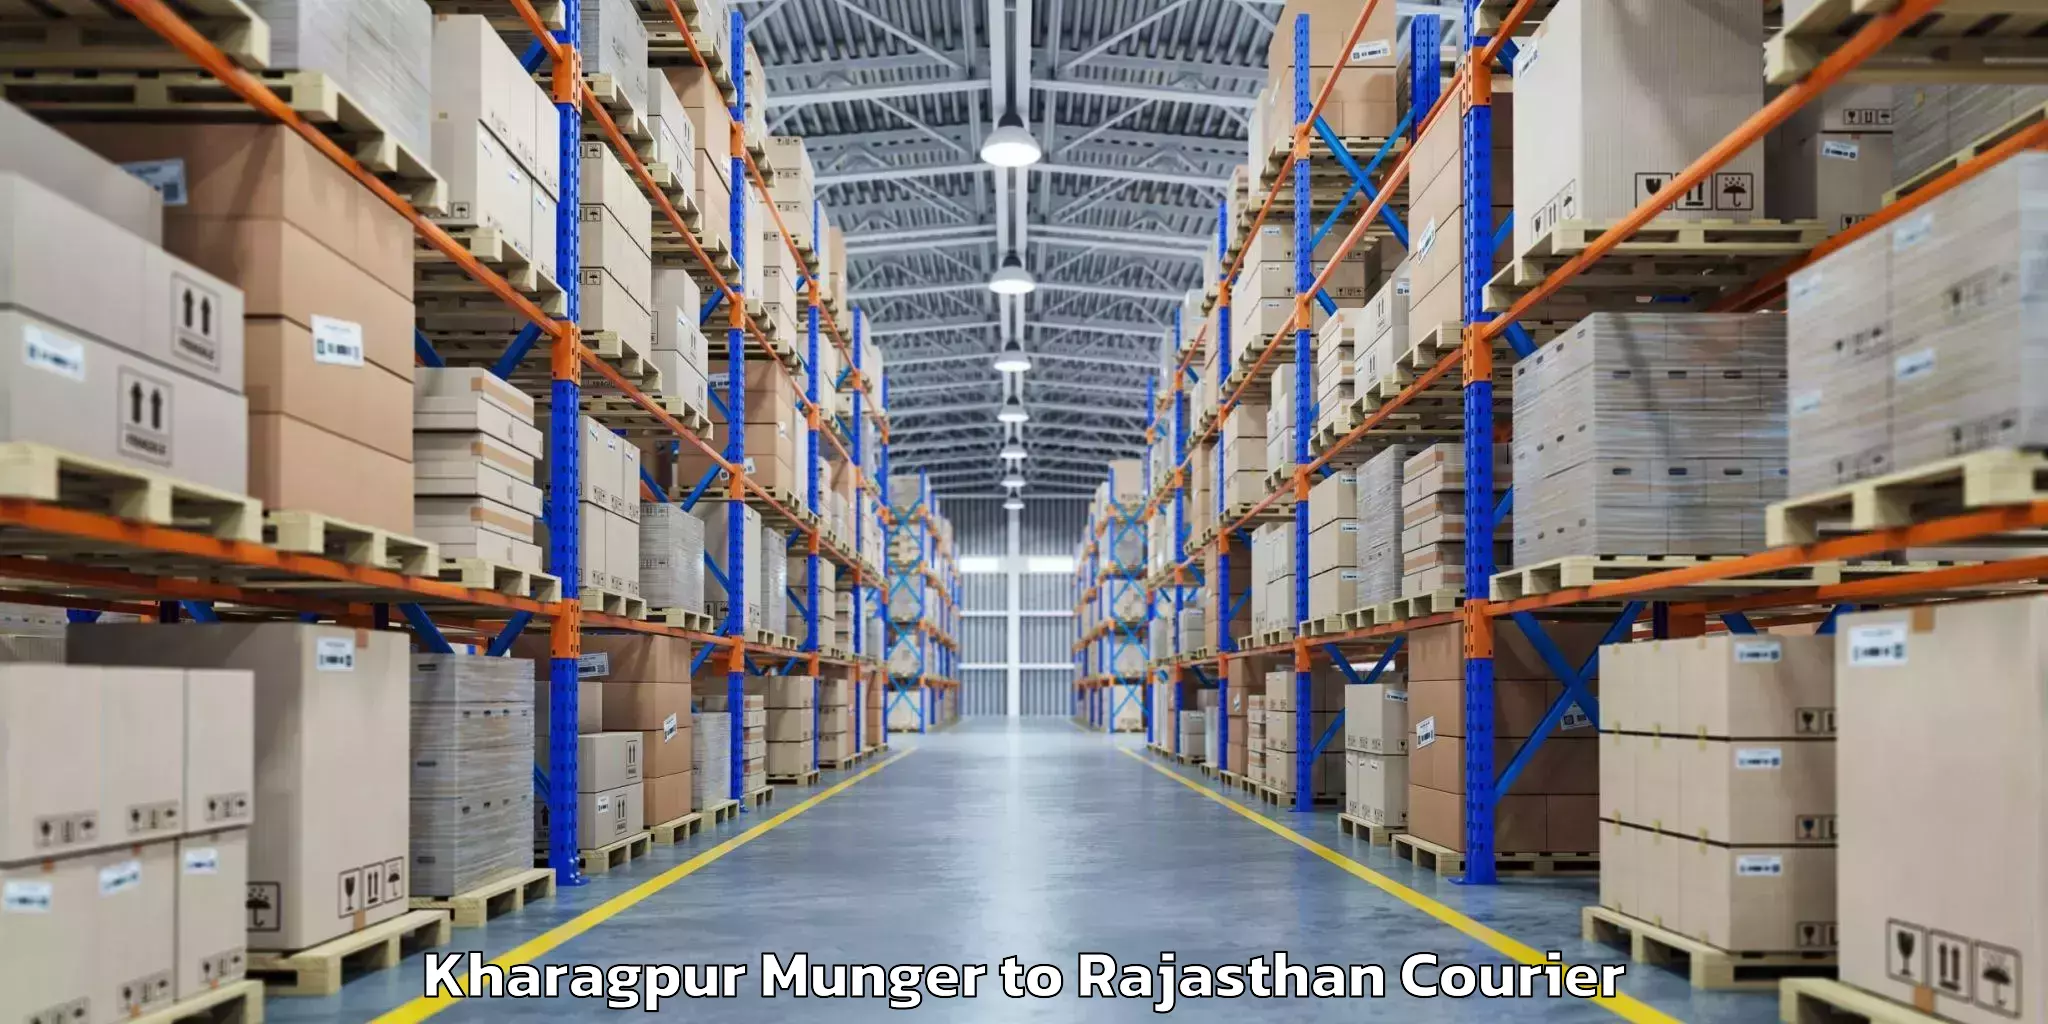 Baggage shipping experience Kharagpur Munger to Yeswanthapur